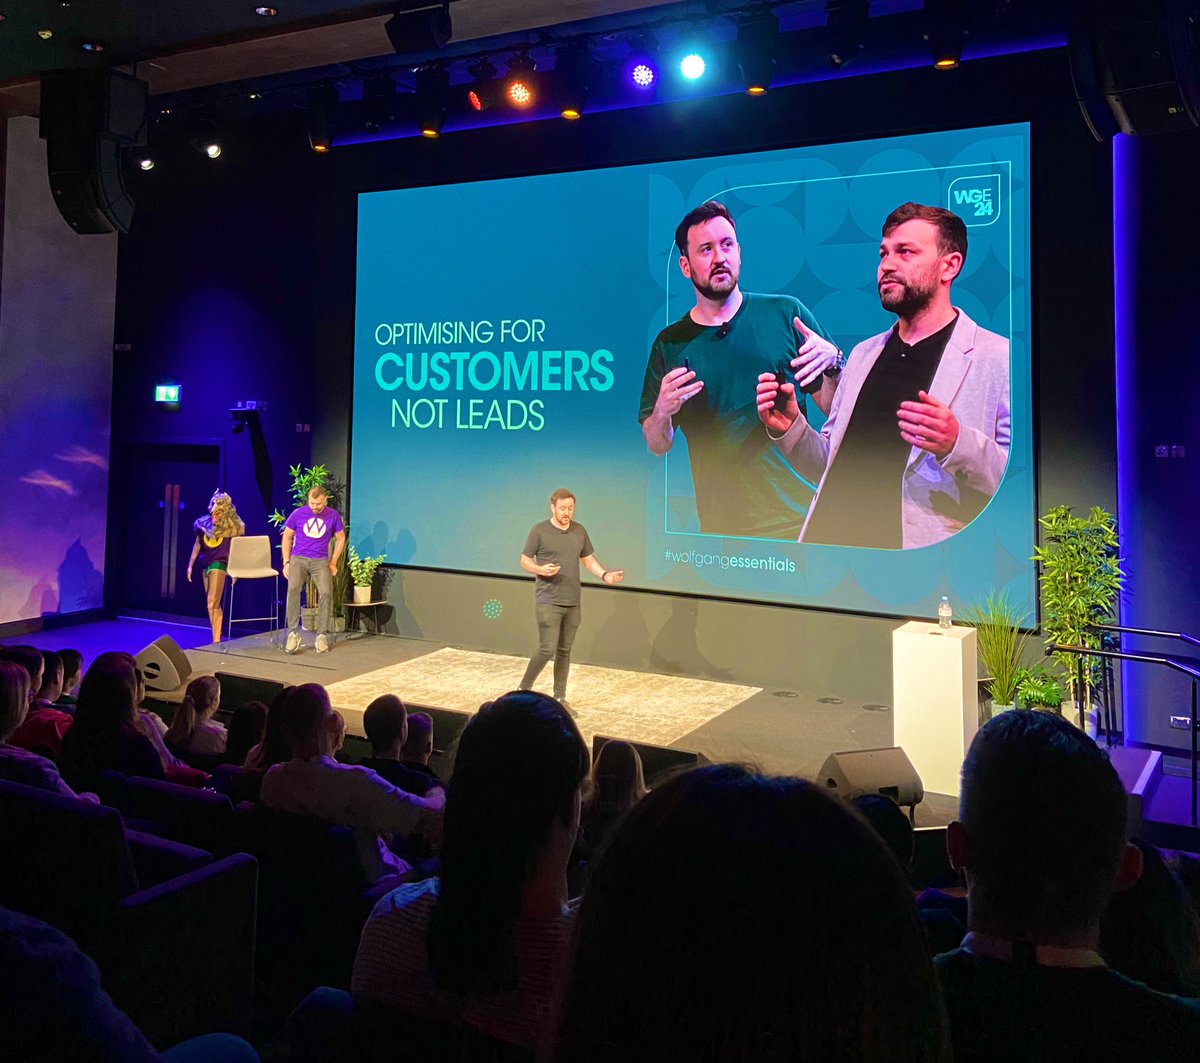 Optimising For Customers, Not Leads‼️ Are you optimising your lead gen campaigns for customers, or are you simply gathering leads? Rob and Iulian gave a stellar talk on this topic.